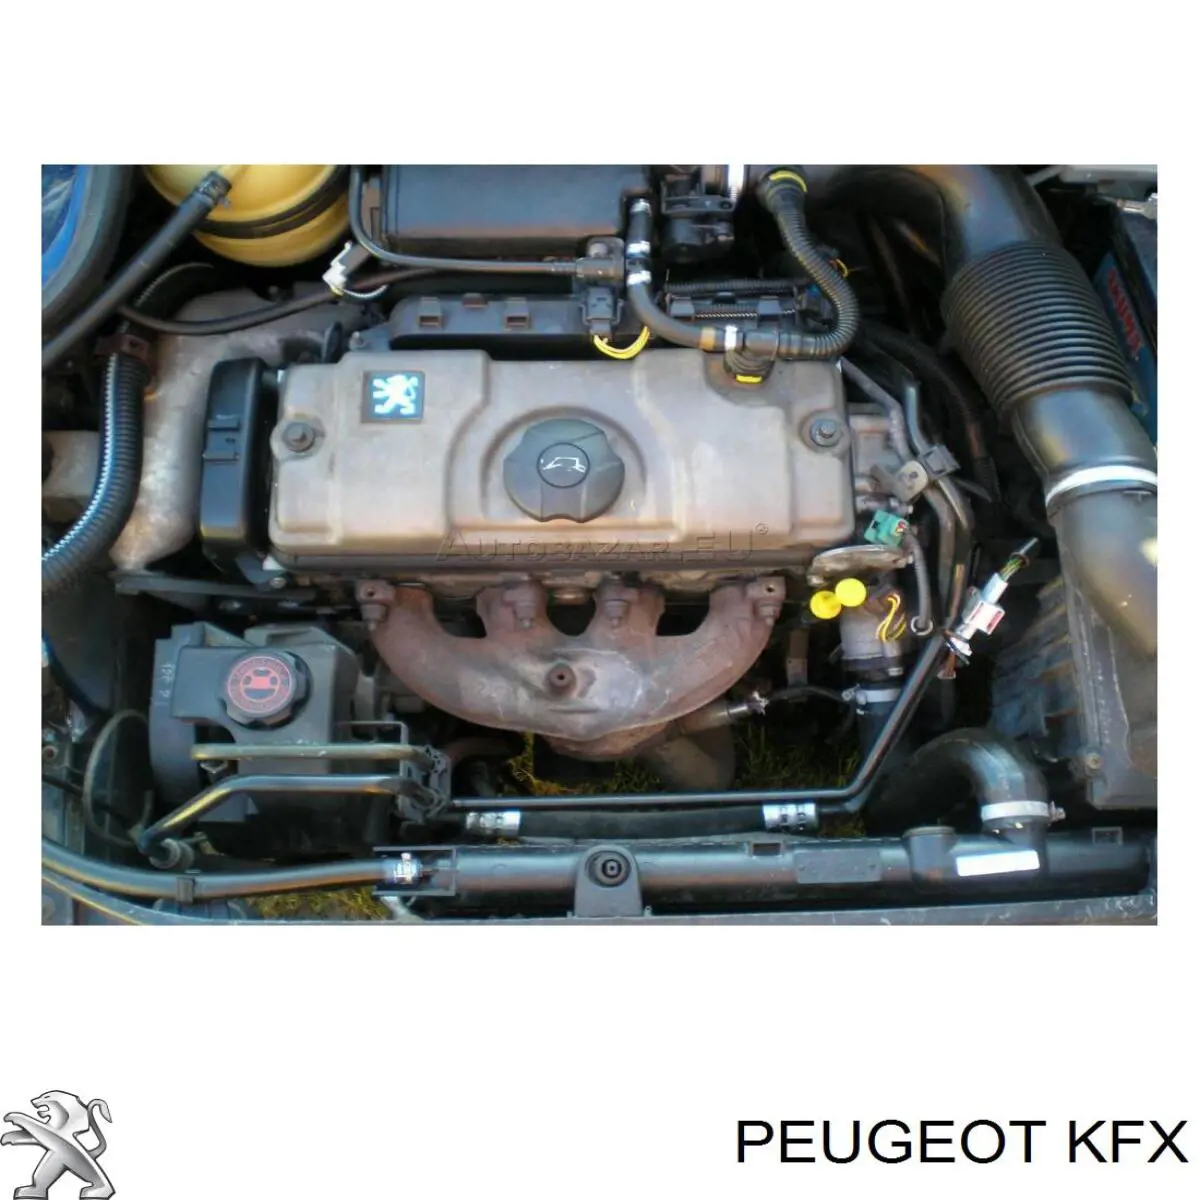 Motor completo para Peugeot 205 (20A, C)